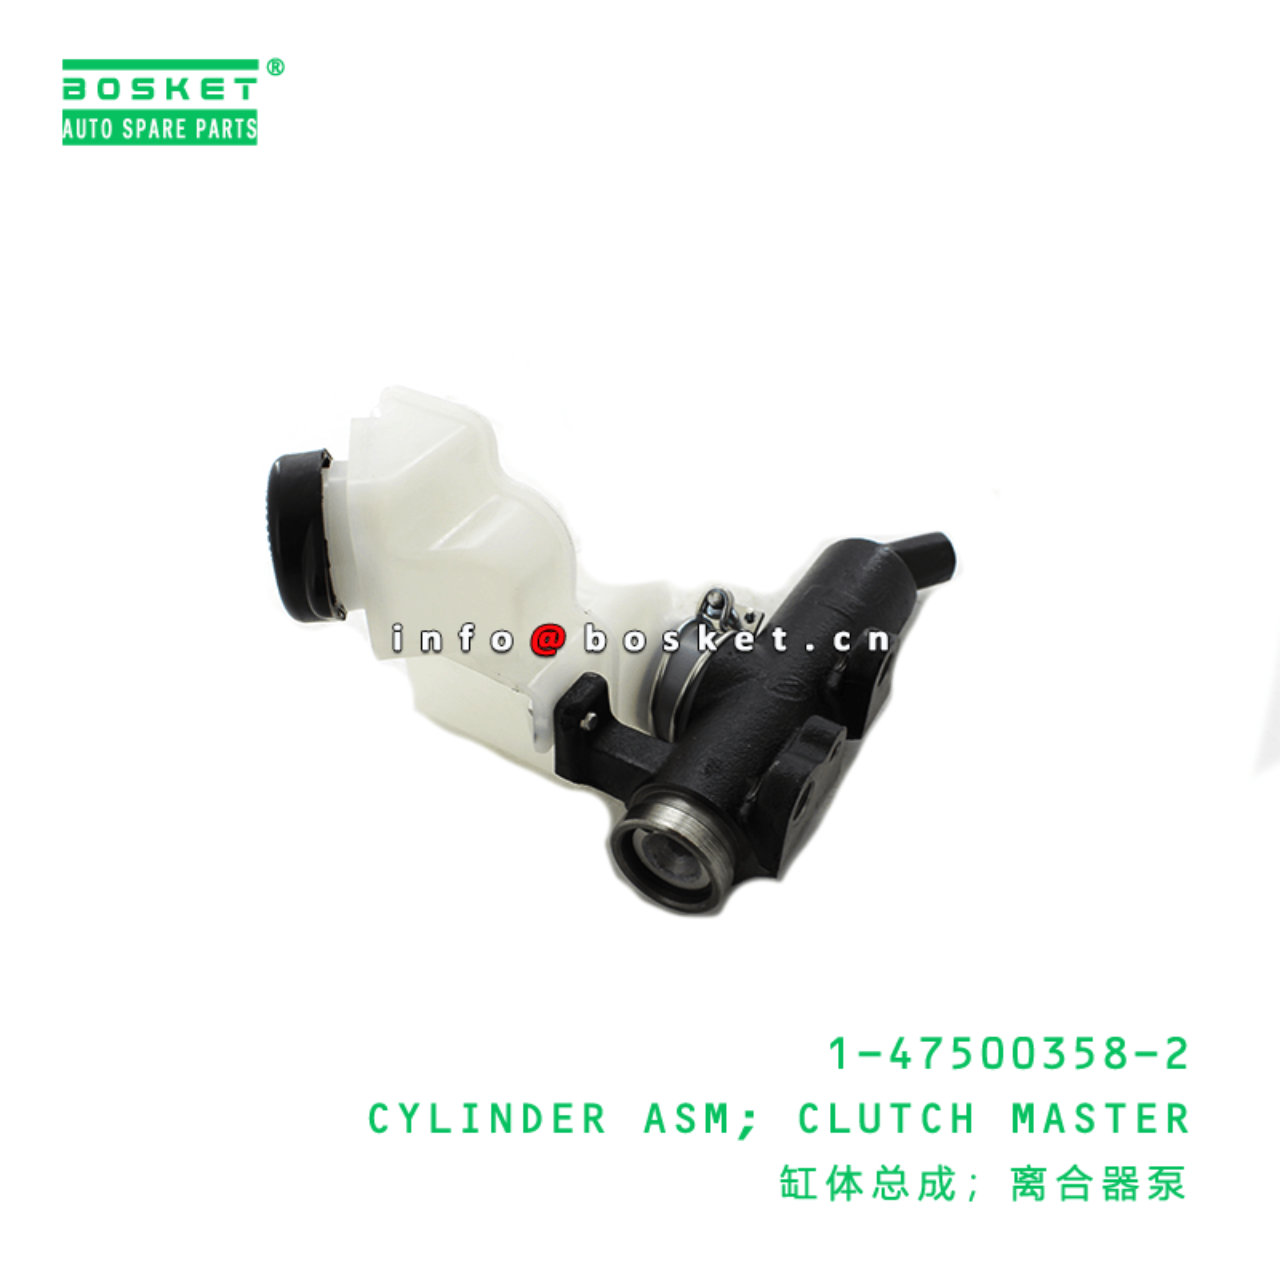 1-47500358-2 Clutch Master Cylinder Assembly Suitable for ISUZU F Series Truck 1475003582